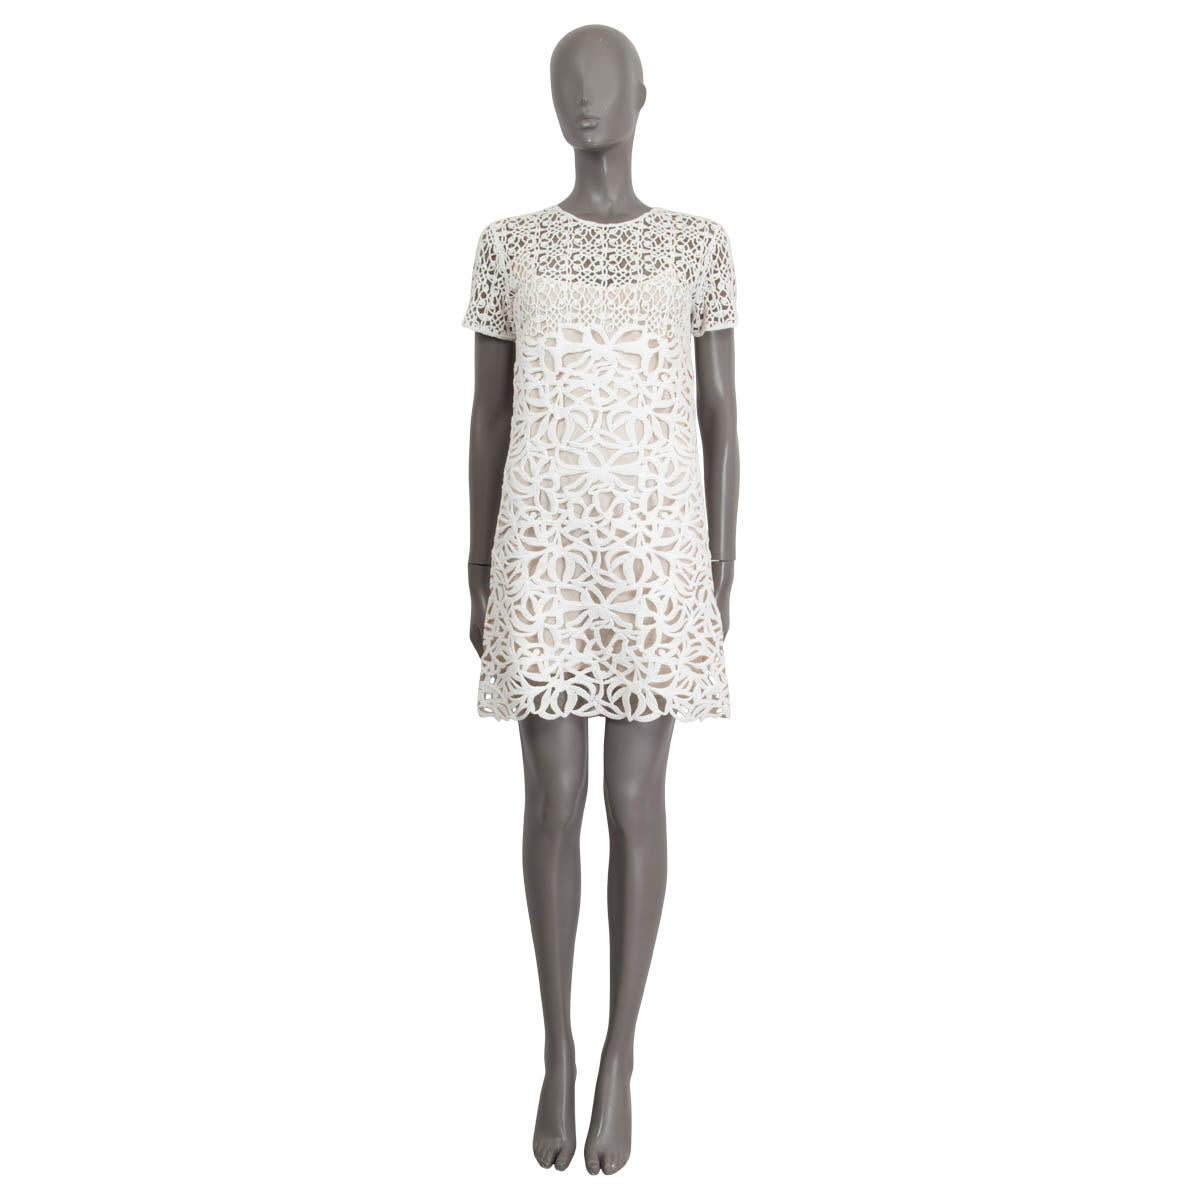 100% authentic Ermanno Scervino short sleeve dress in off-white nylon (100%). Embellished with crochet all over the dress. Opens with a concealed zipper on the back. Unlined. Comes with an off-white polyester (100%) slip dress. Has been worn and is